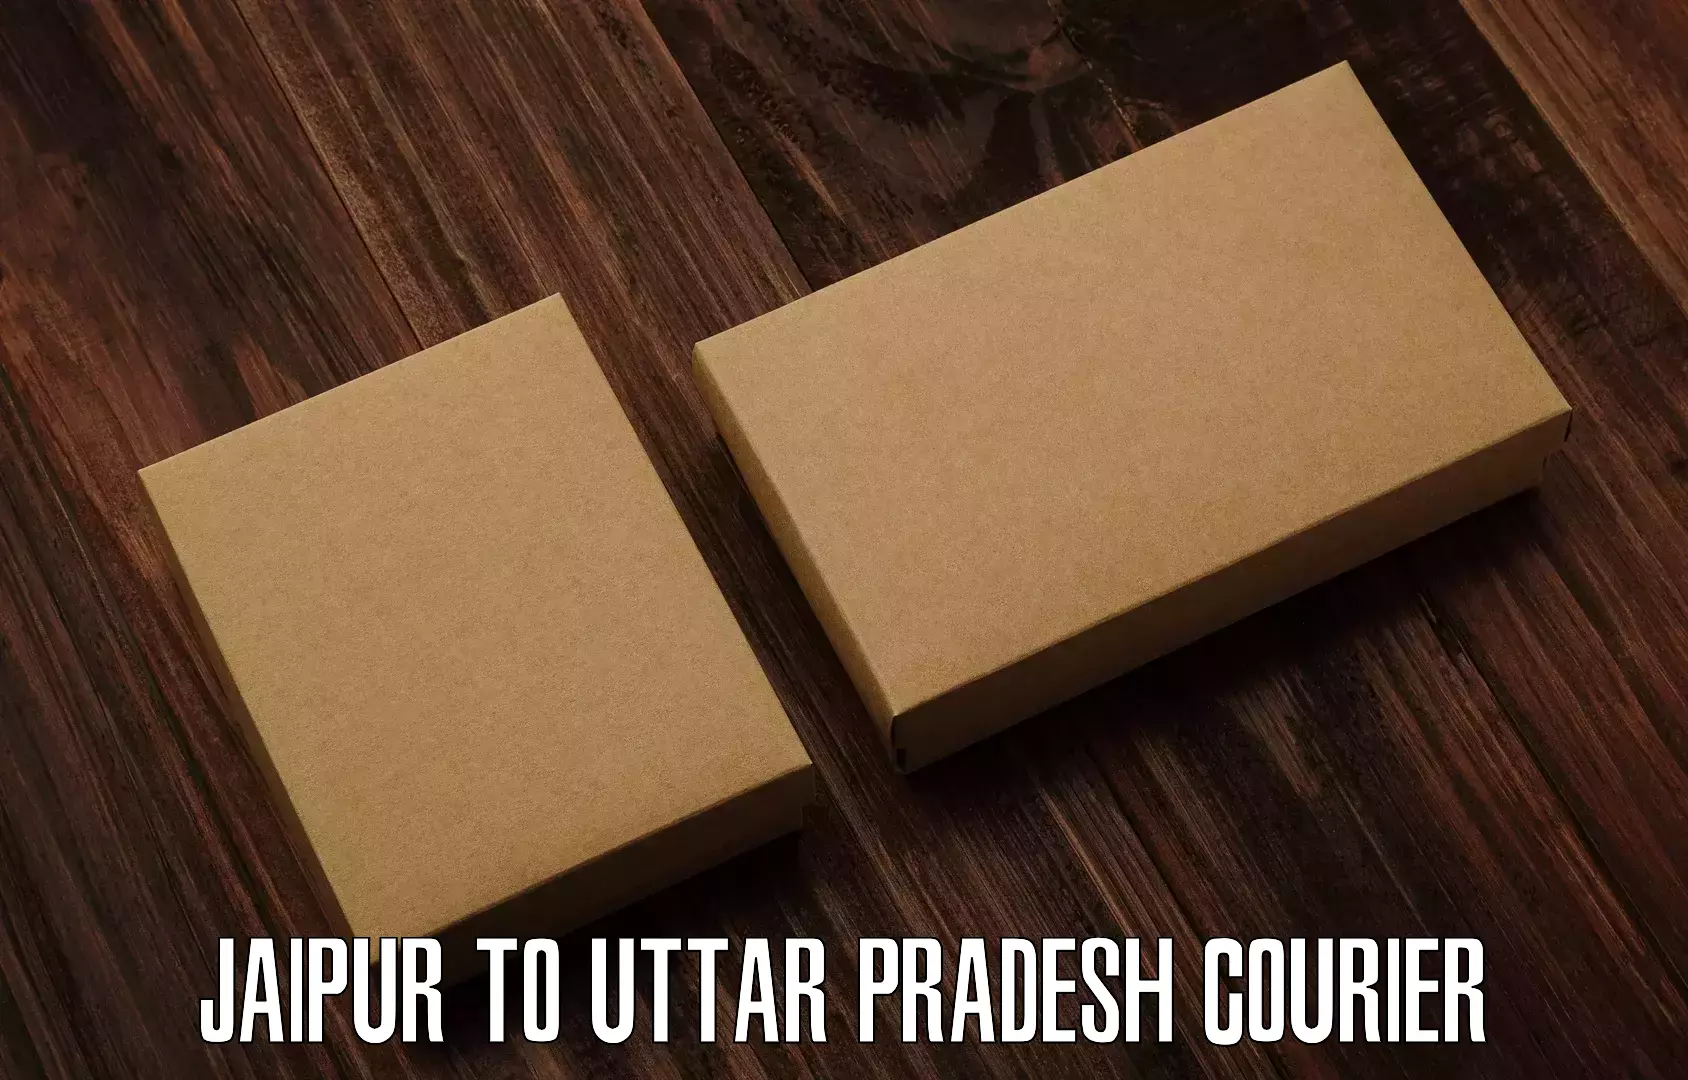 Courier service booking Jaipur to Pilibhit